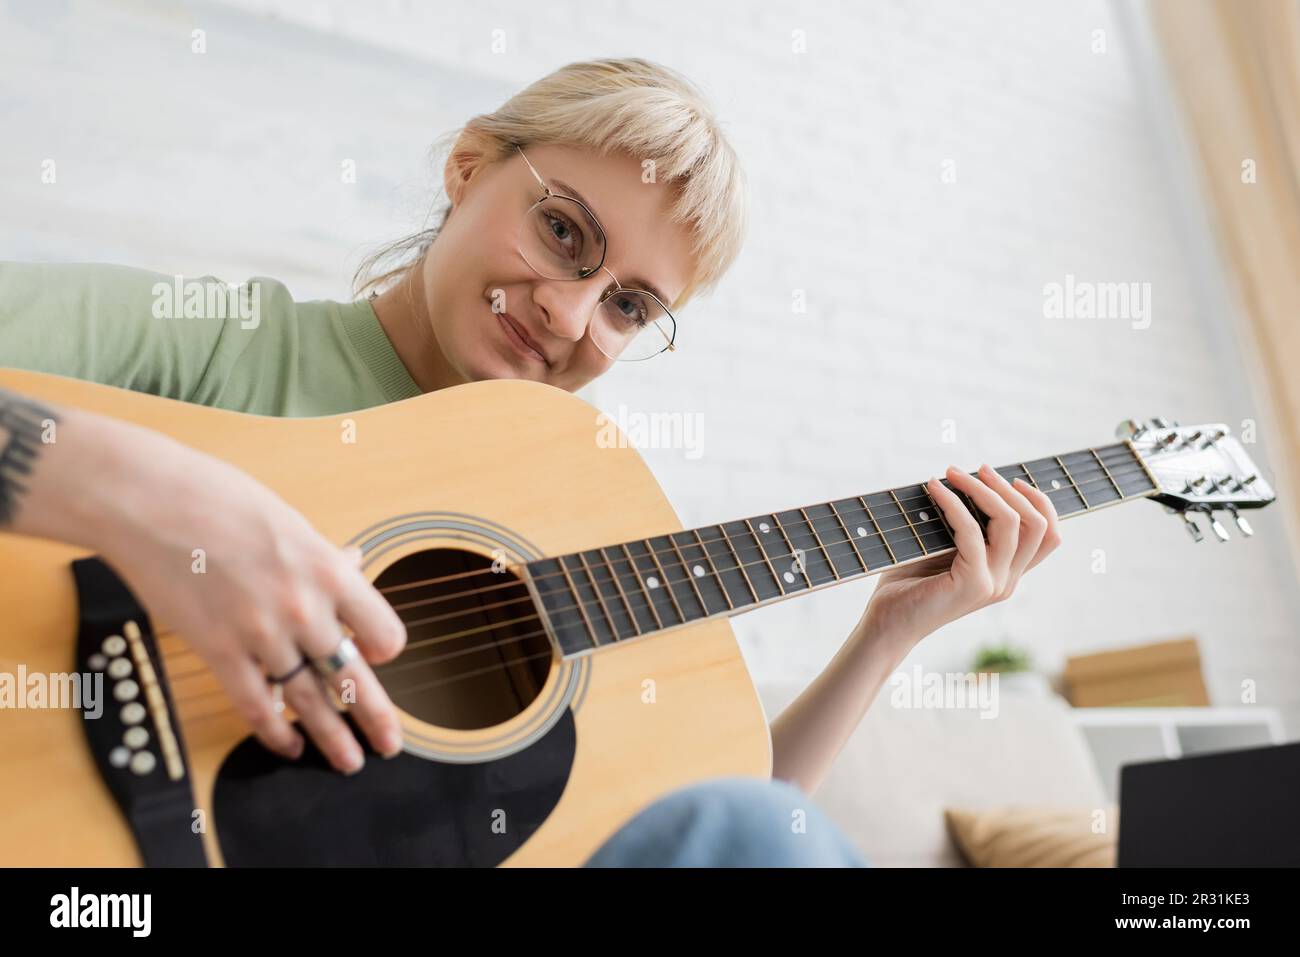 cheerful young woman in glasses with bangs and tattoo on hand playing acoustic guitar and looking at camera while sitting in modern living room, learn Stock Photo